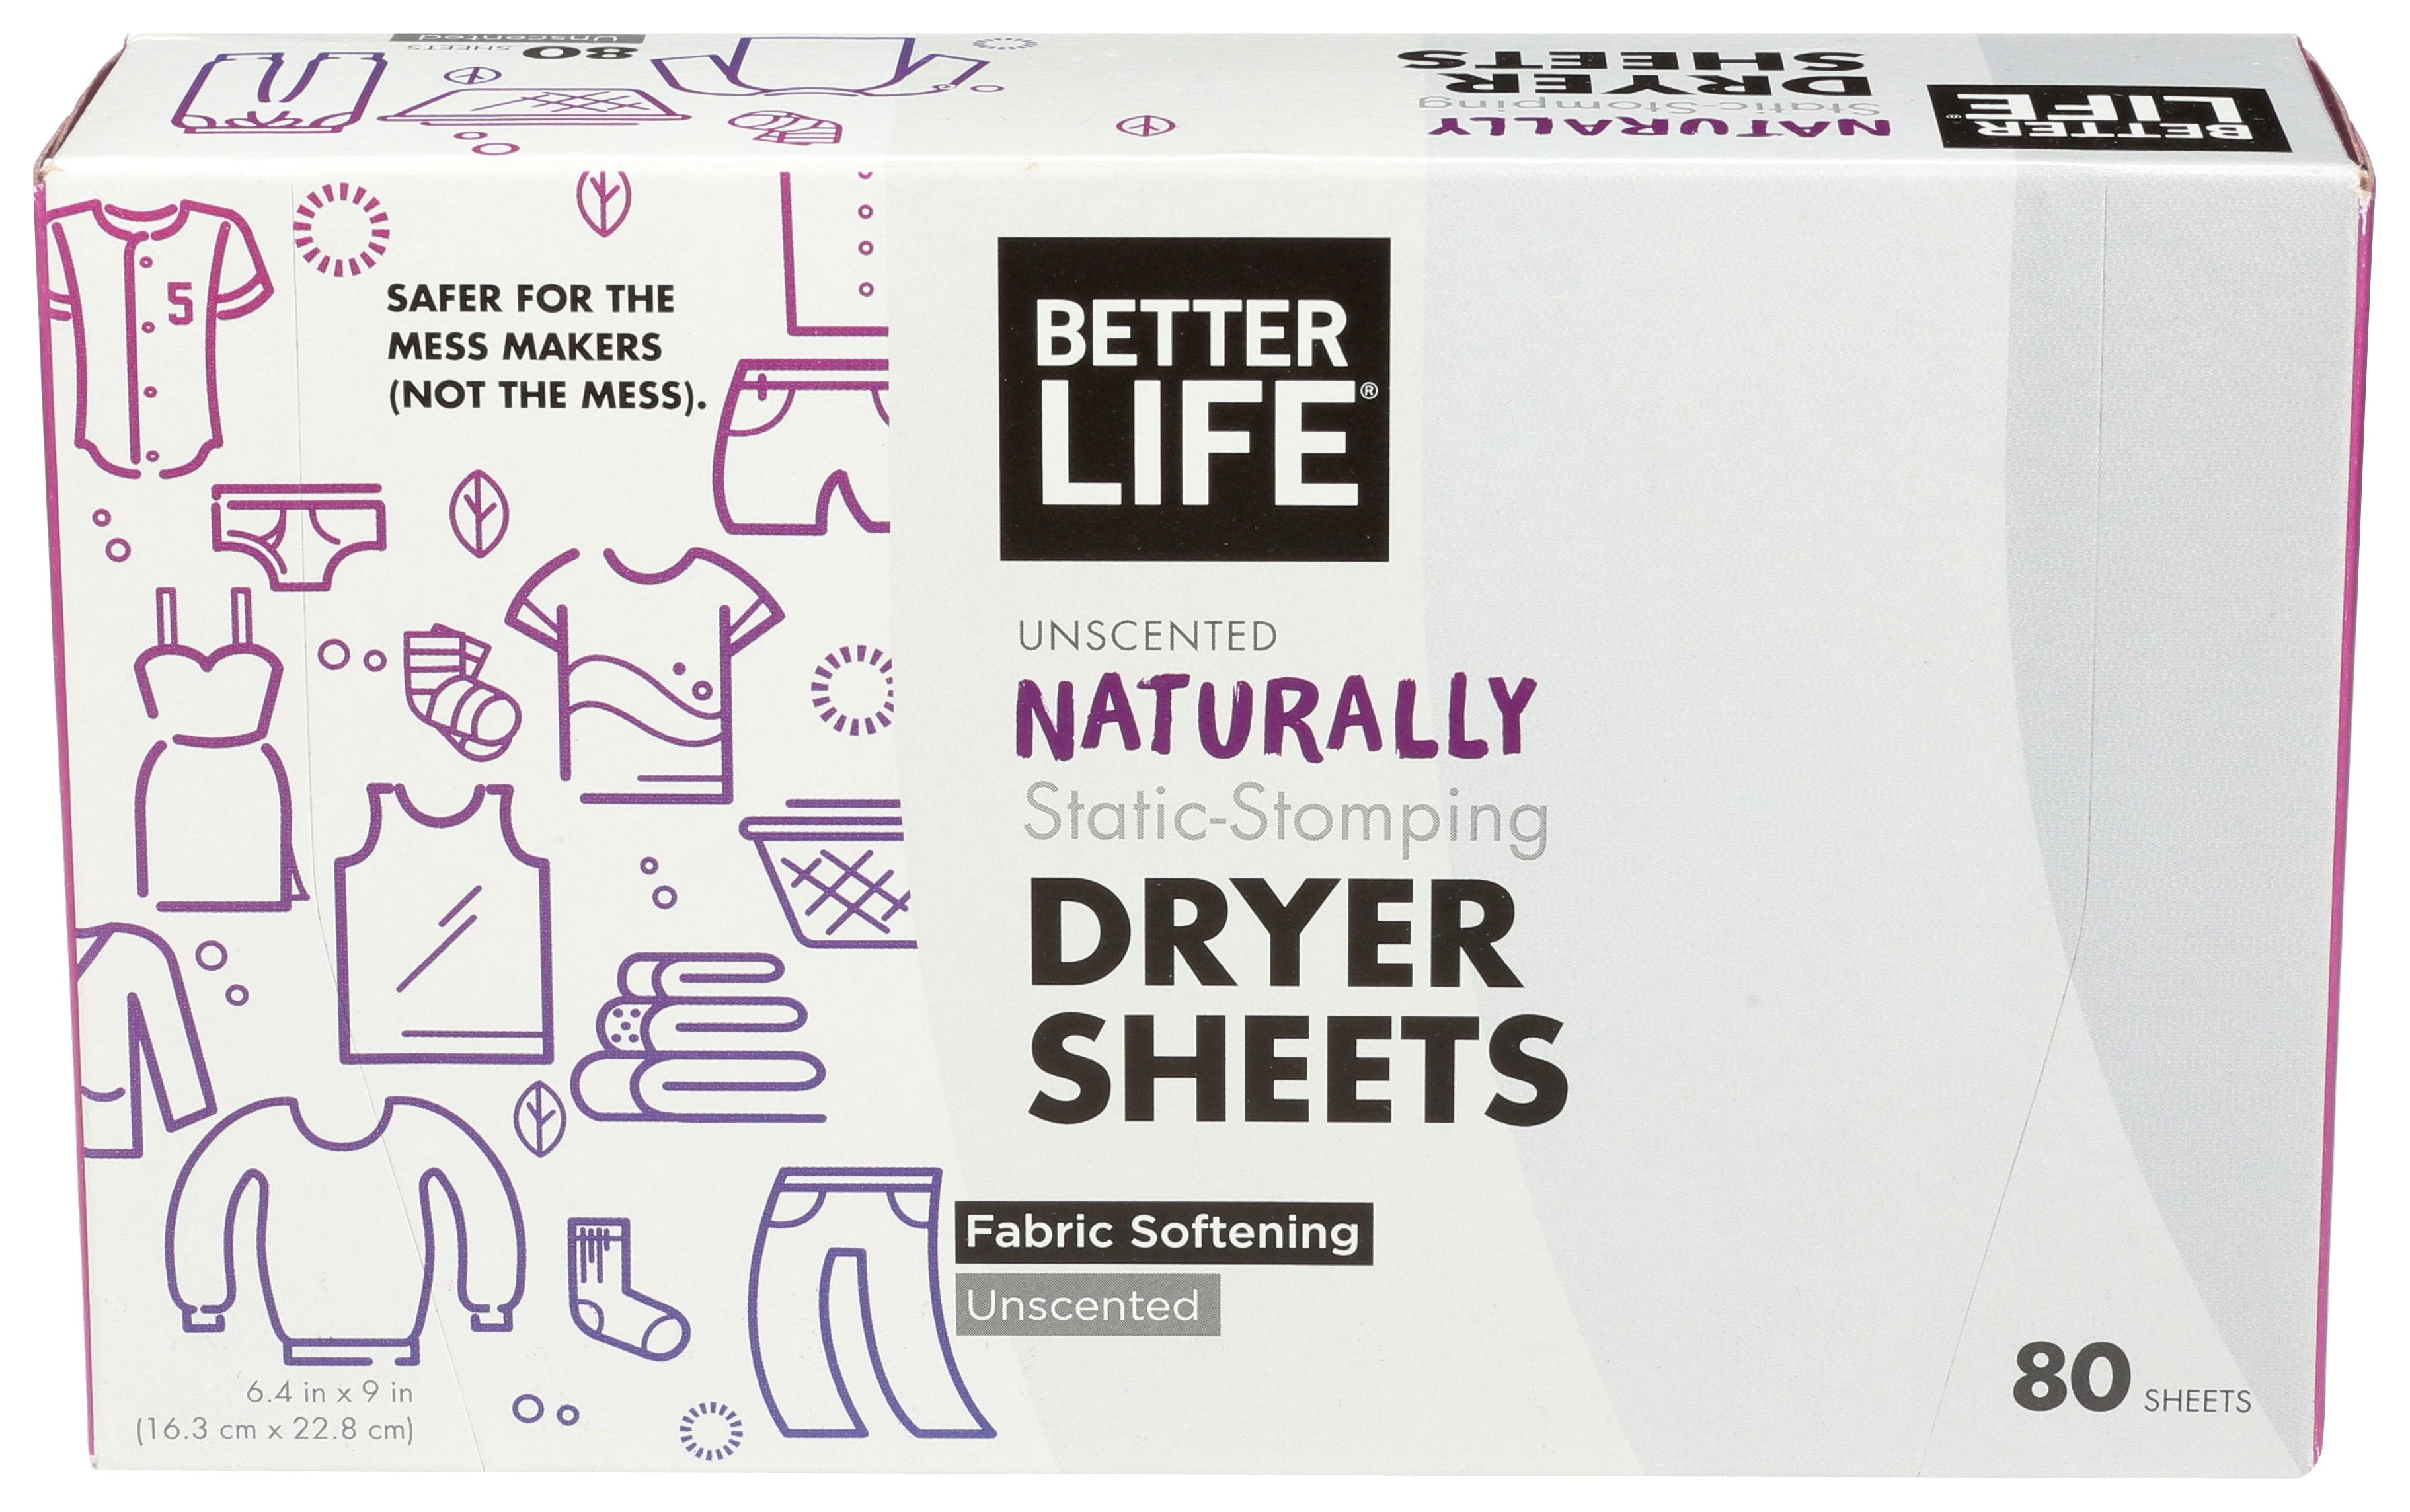 BETTER LIFE SHEETS DRYER UNSCENTED - Case of 6